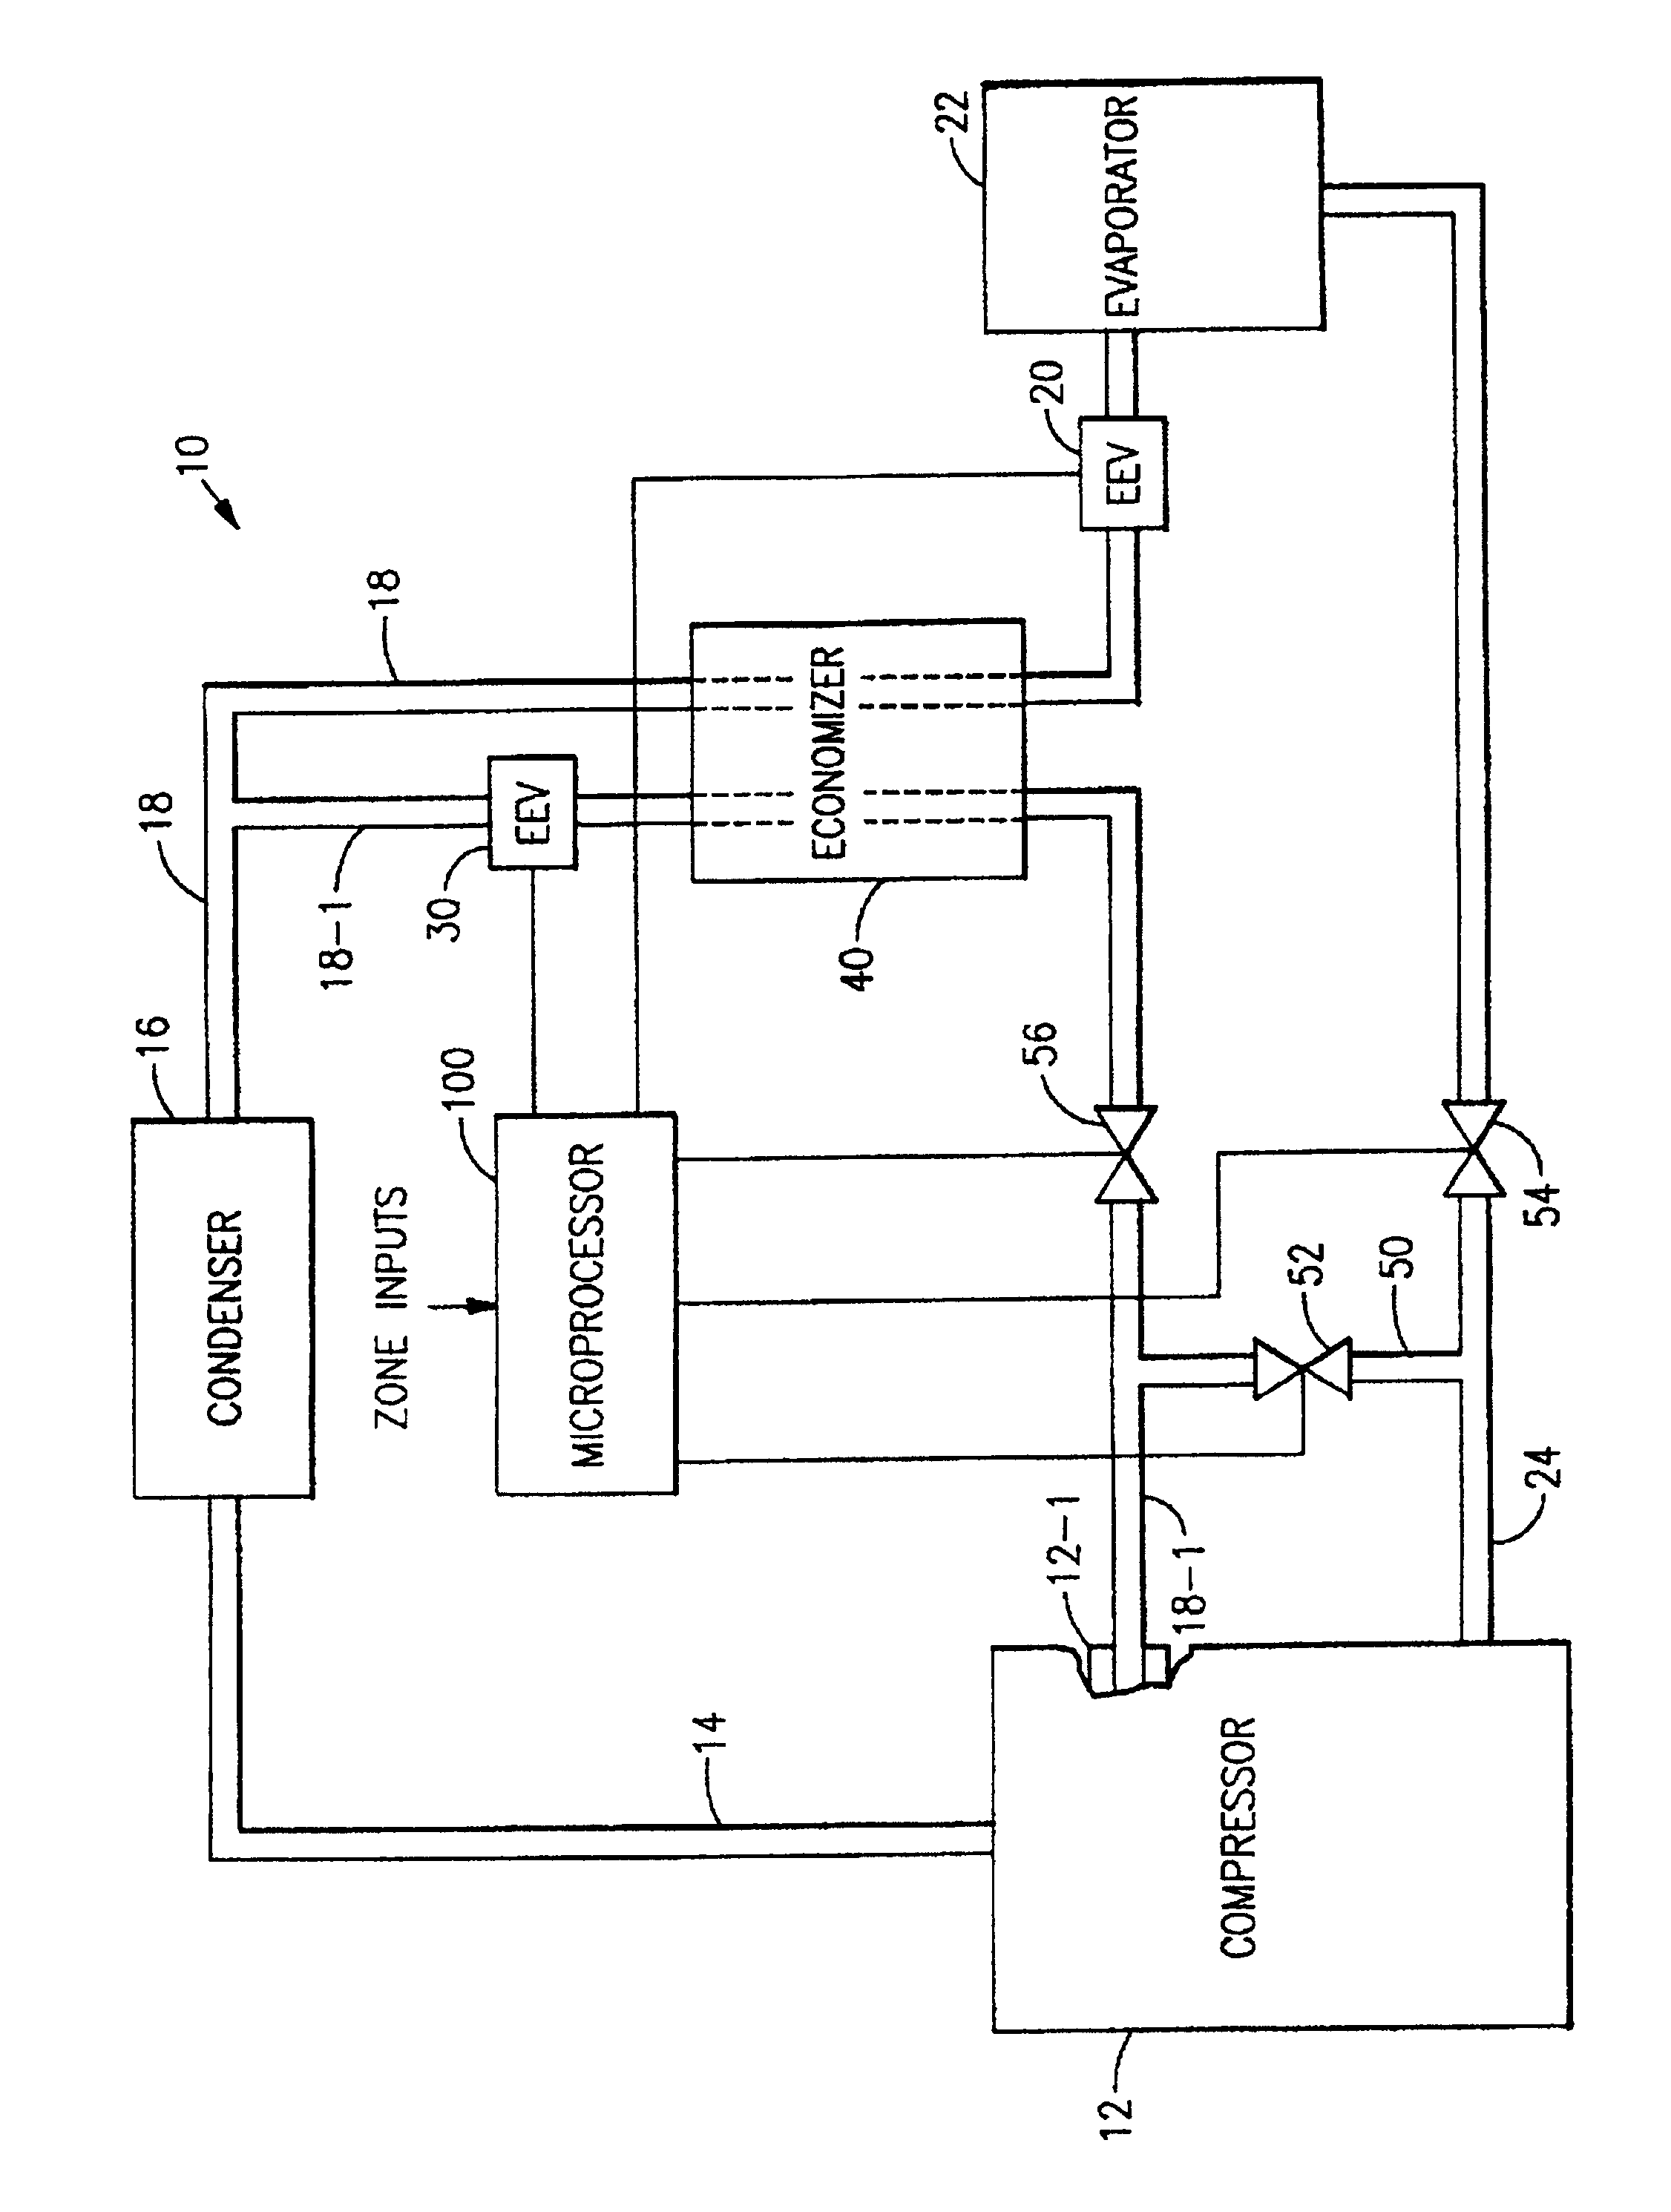 Pulsed flow for capacity control